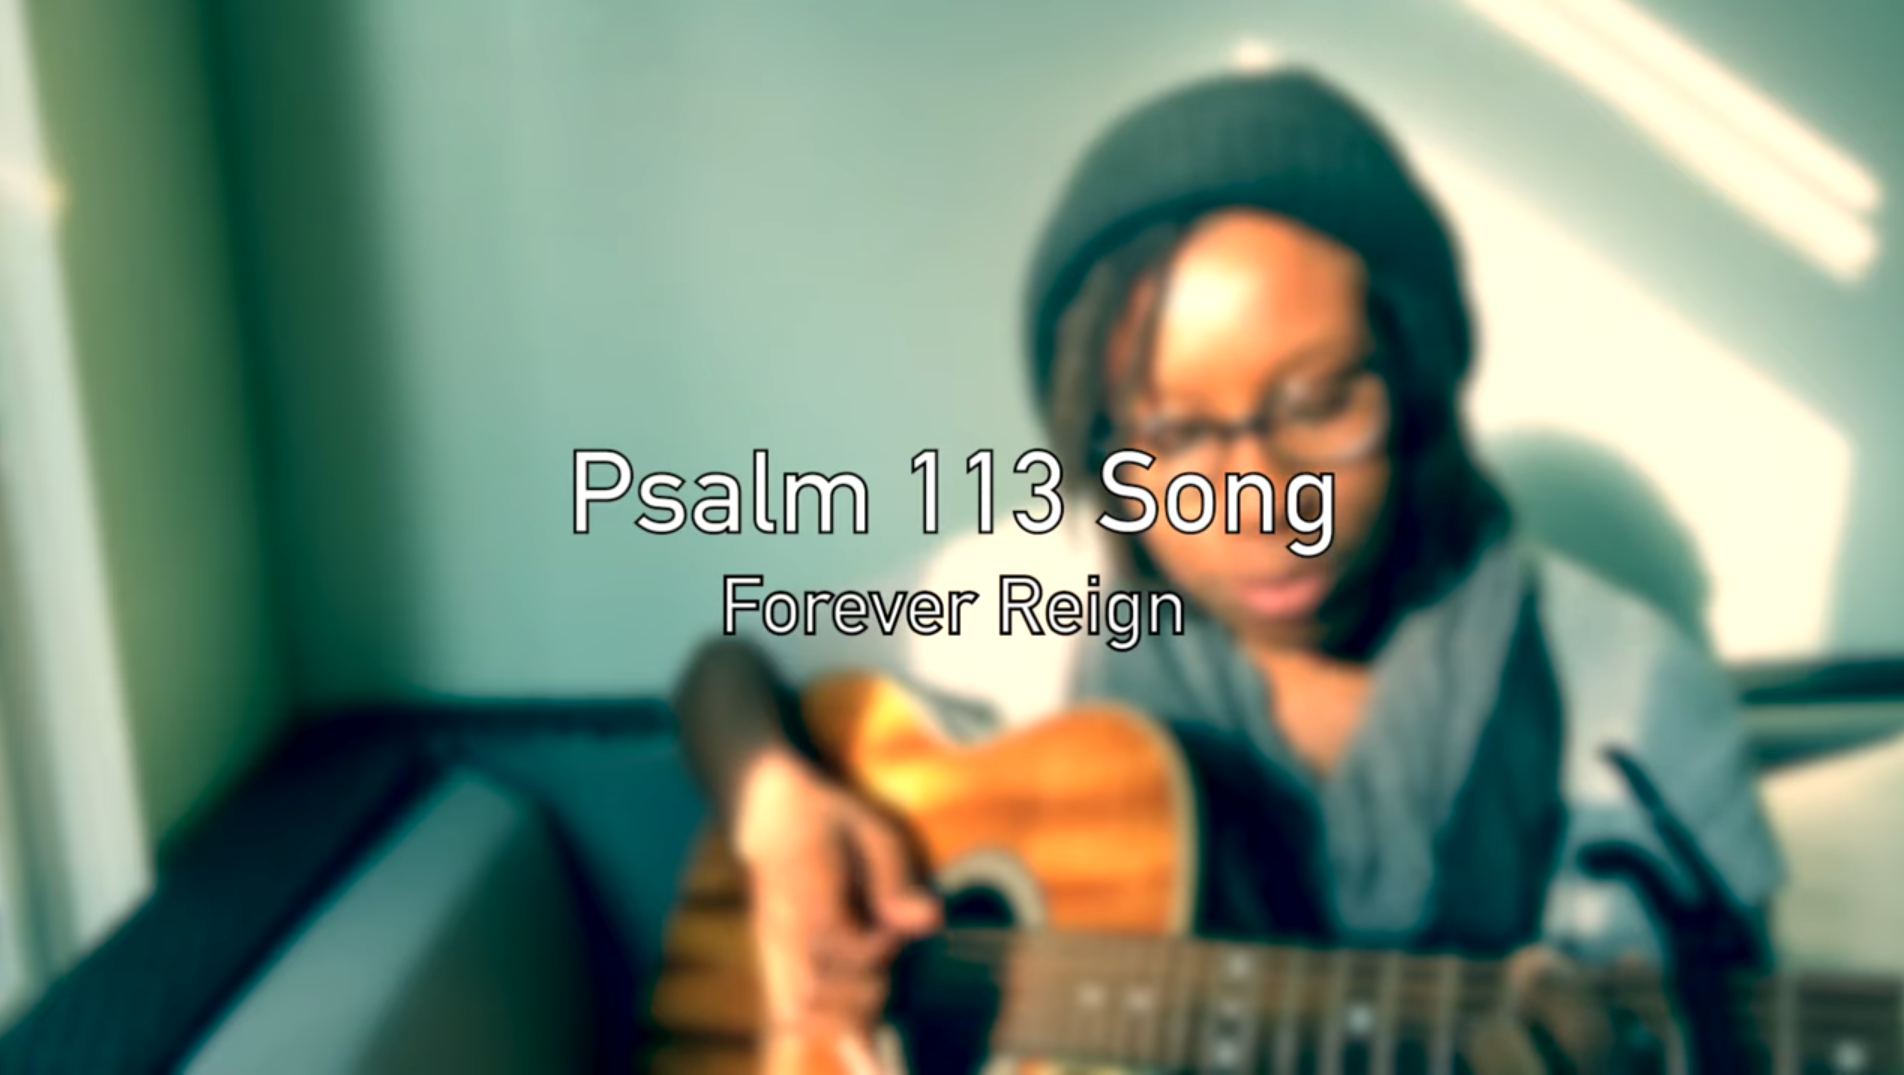 Forever Reign – Song Based on Psalm 113 by Hadarah BatYah